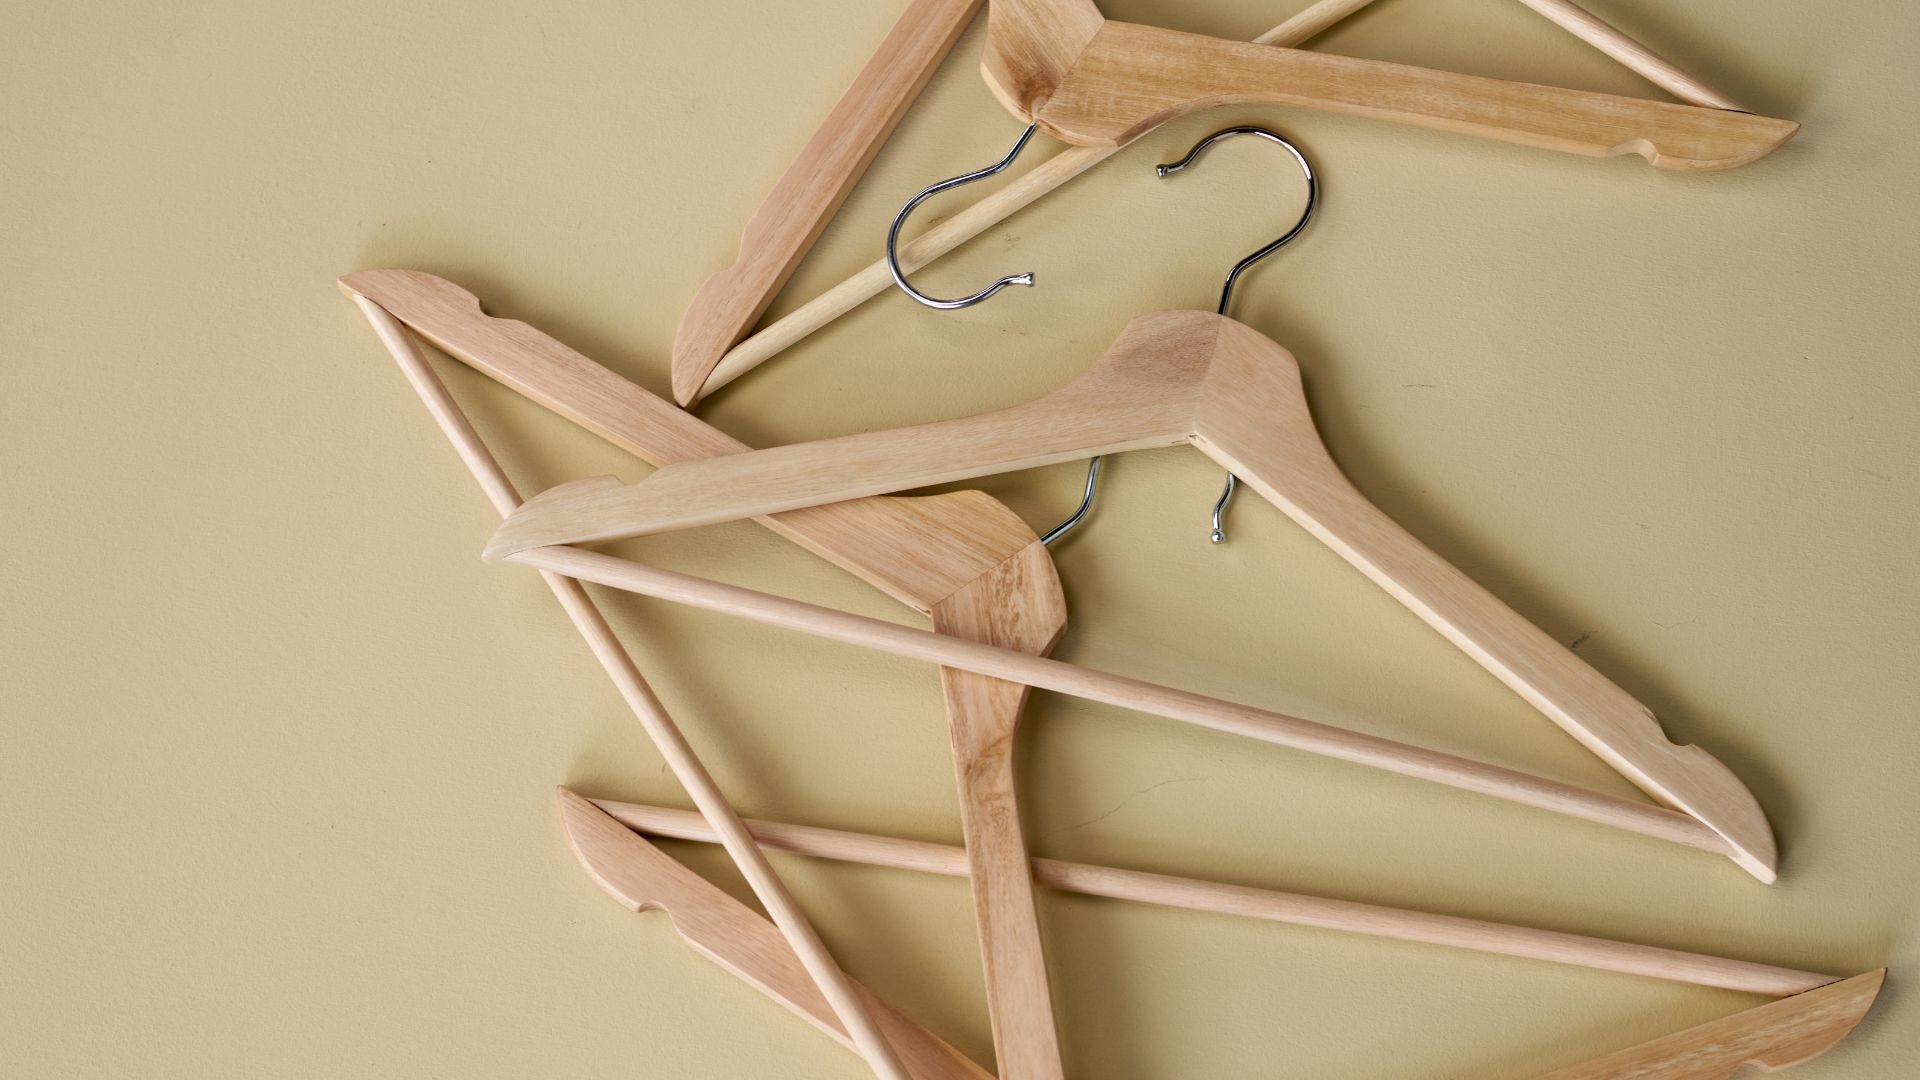 Have You Been Using Clothes Hangers Wrong?